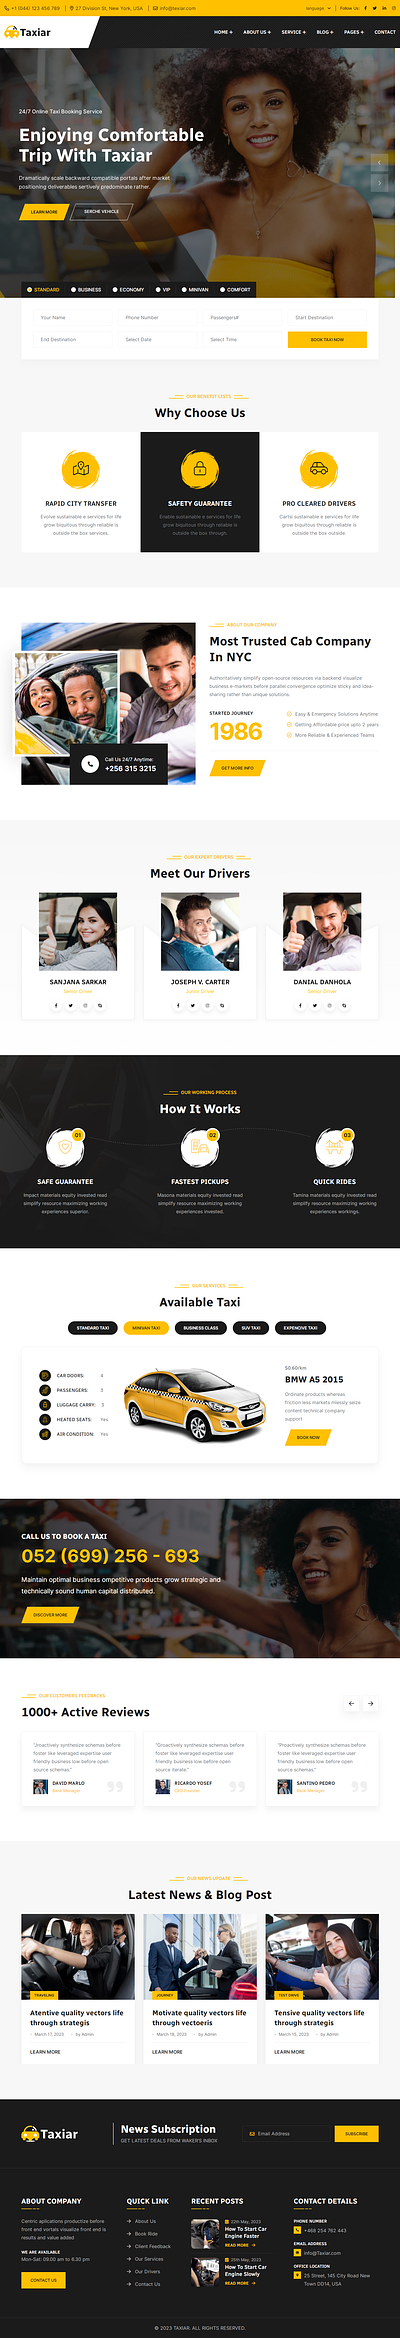 Taxiar - Online Taxi Service Wordpress Theme vehicles